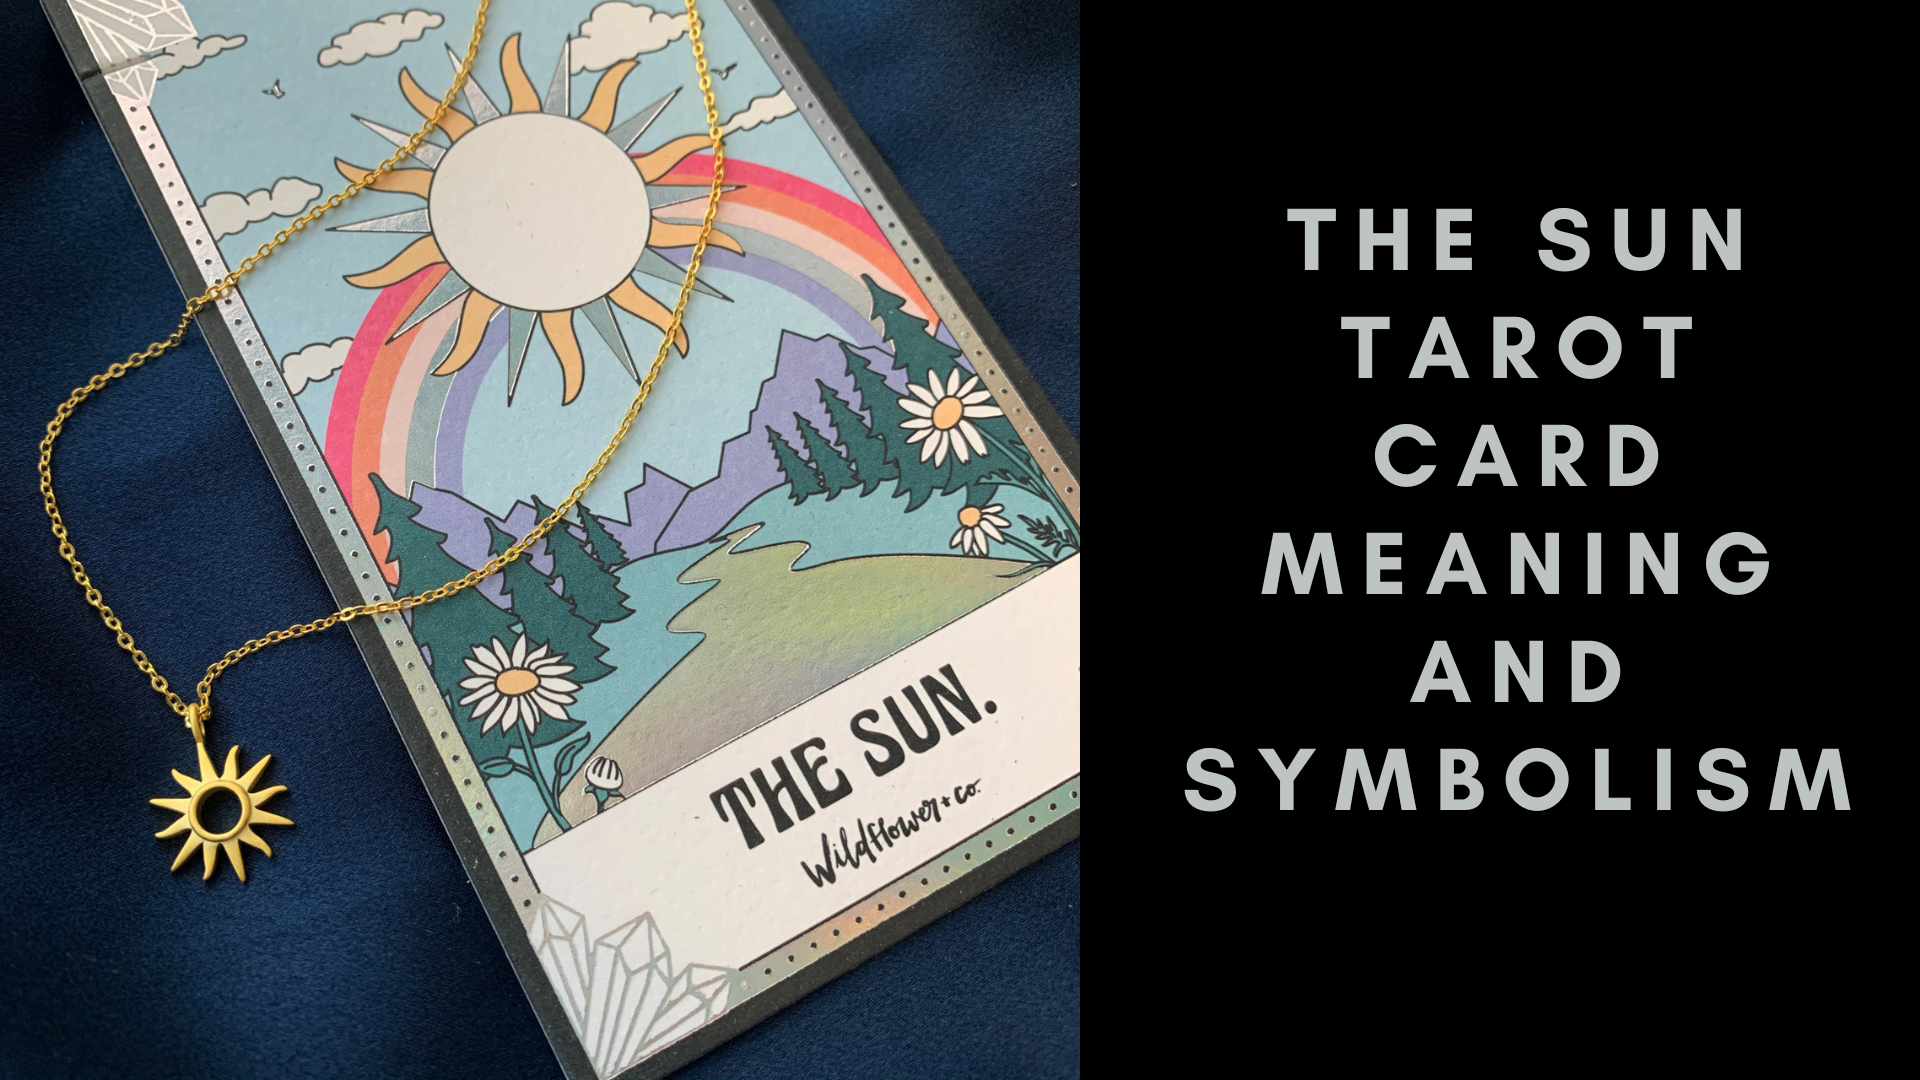 The Sun Tarot Card on the left with sun neck lace with words The Sun Tarot Card Meaning And Symbolism